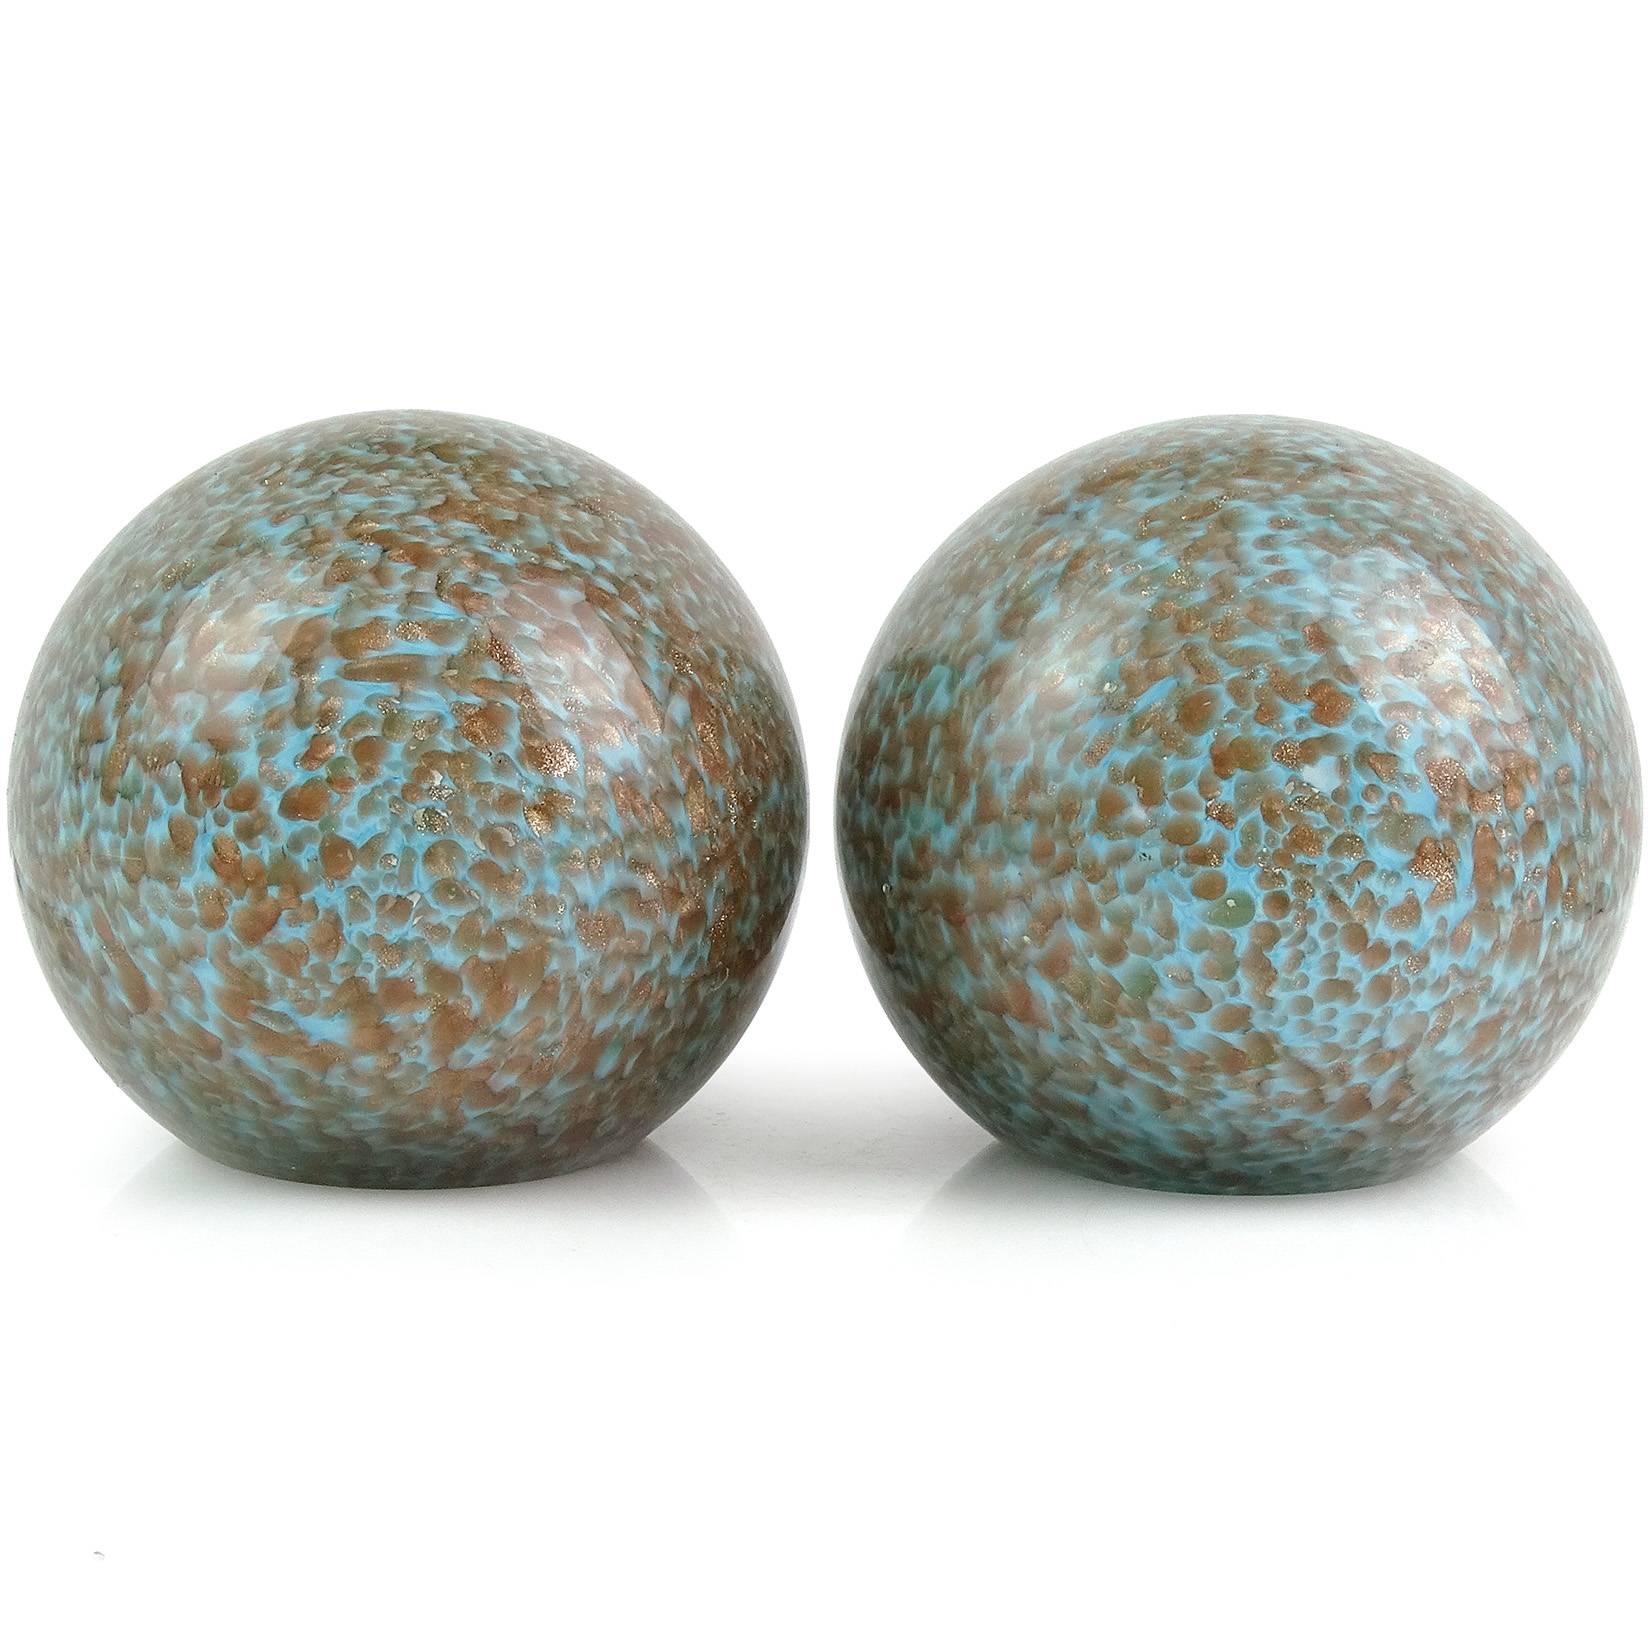 Murano handblown light blue with copper aventurine flecks Italian art glass ball bookends. Attributed to the Fratelli Toso company. They are polished on two sides, looking like geode rocks. The copper spots glitter all around them. They measure a